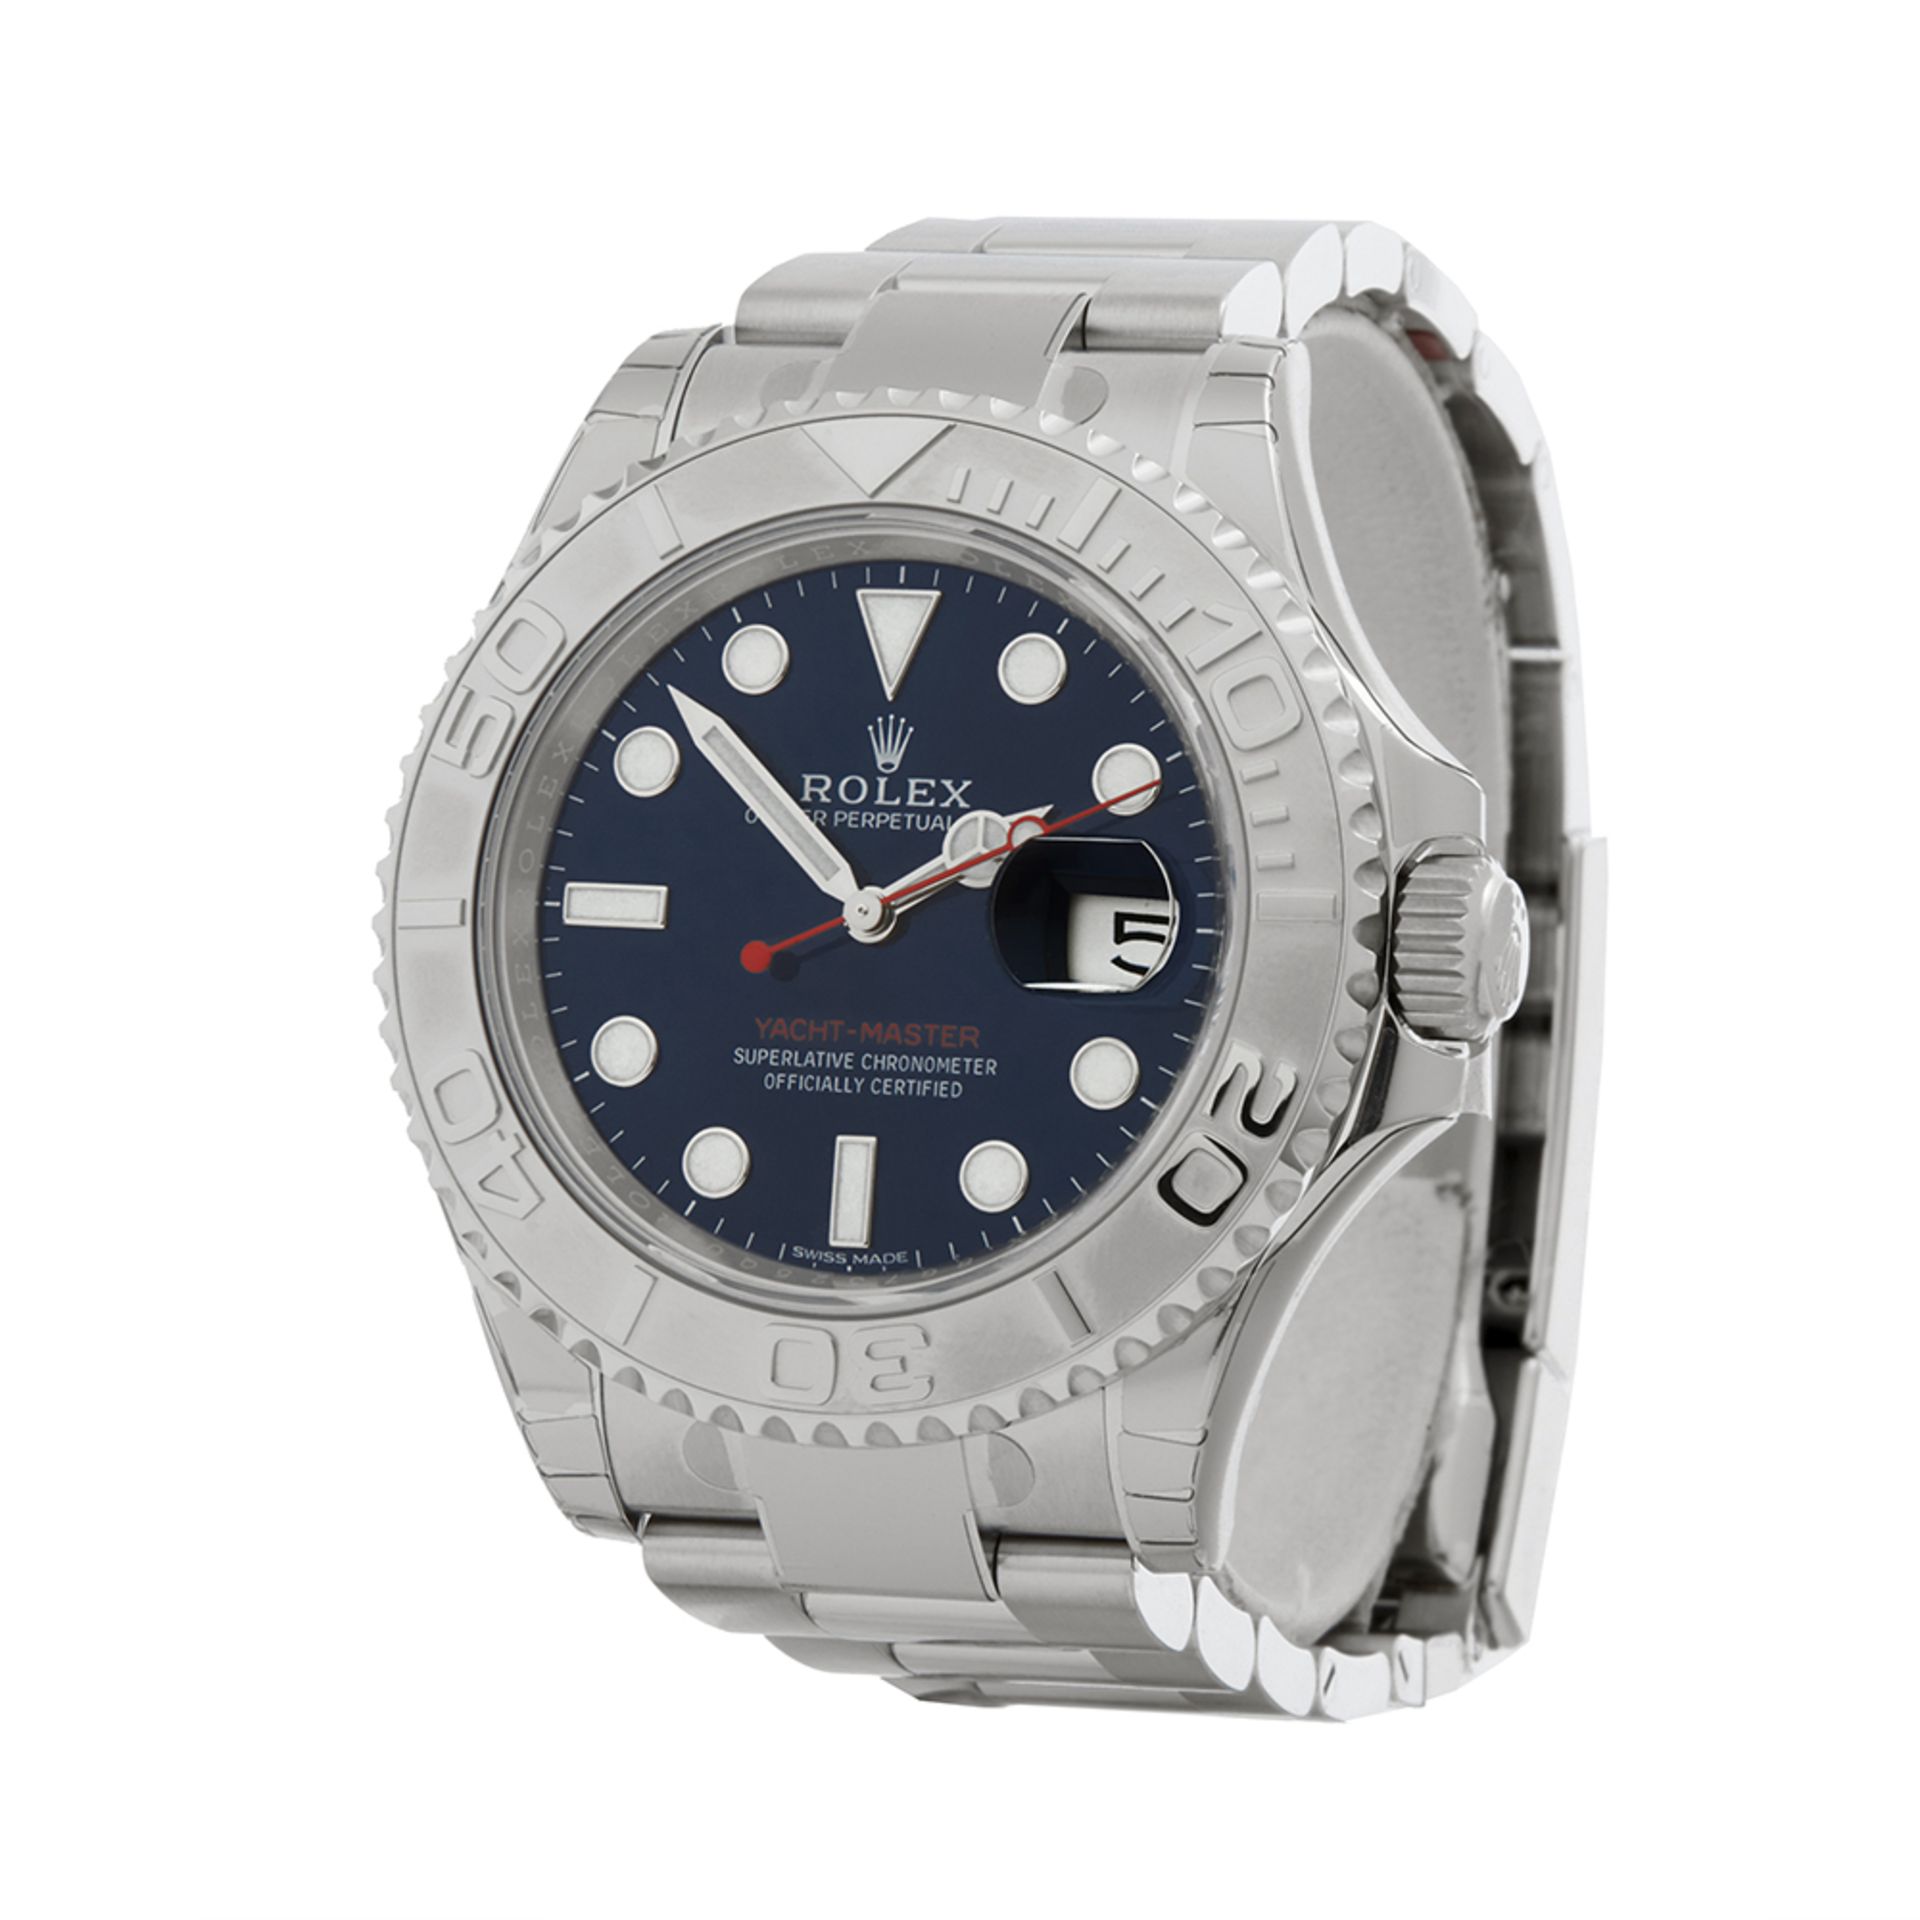 Rolex Yacht-Master Stainless Steel - 116622 - Image 3 of 7